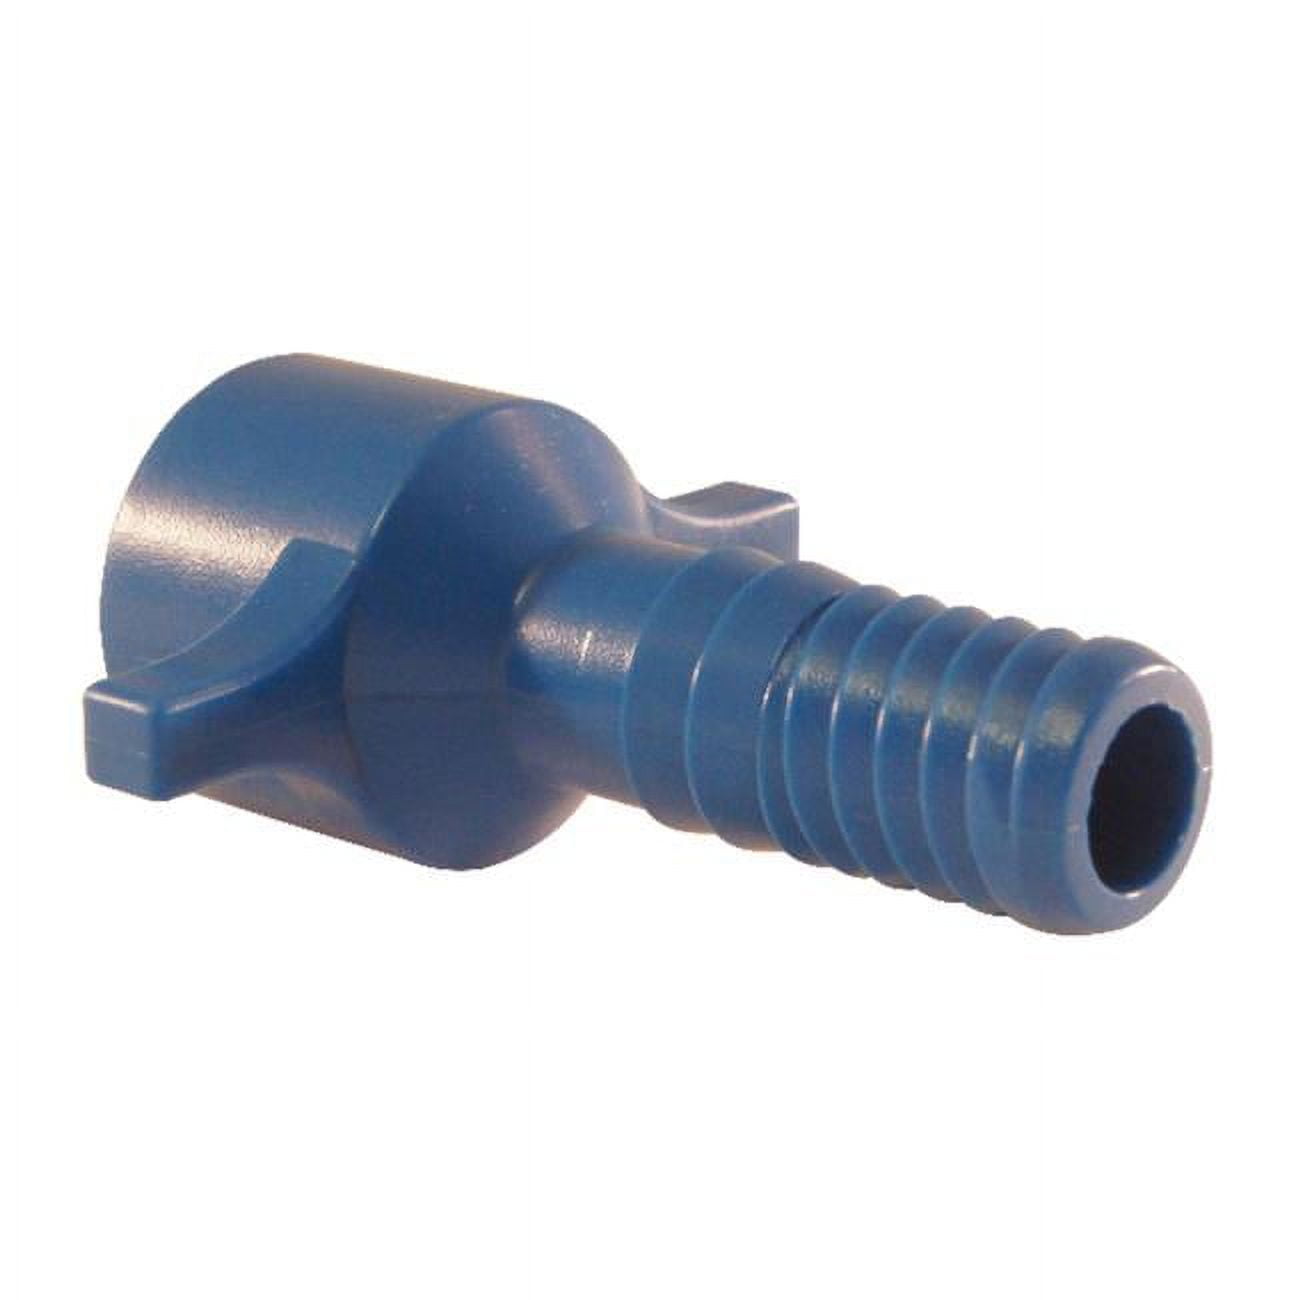 4814497 1.5 In. Insert X 1.5 In. Dia. Fpt Polypropylene Female Adapter, Blue